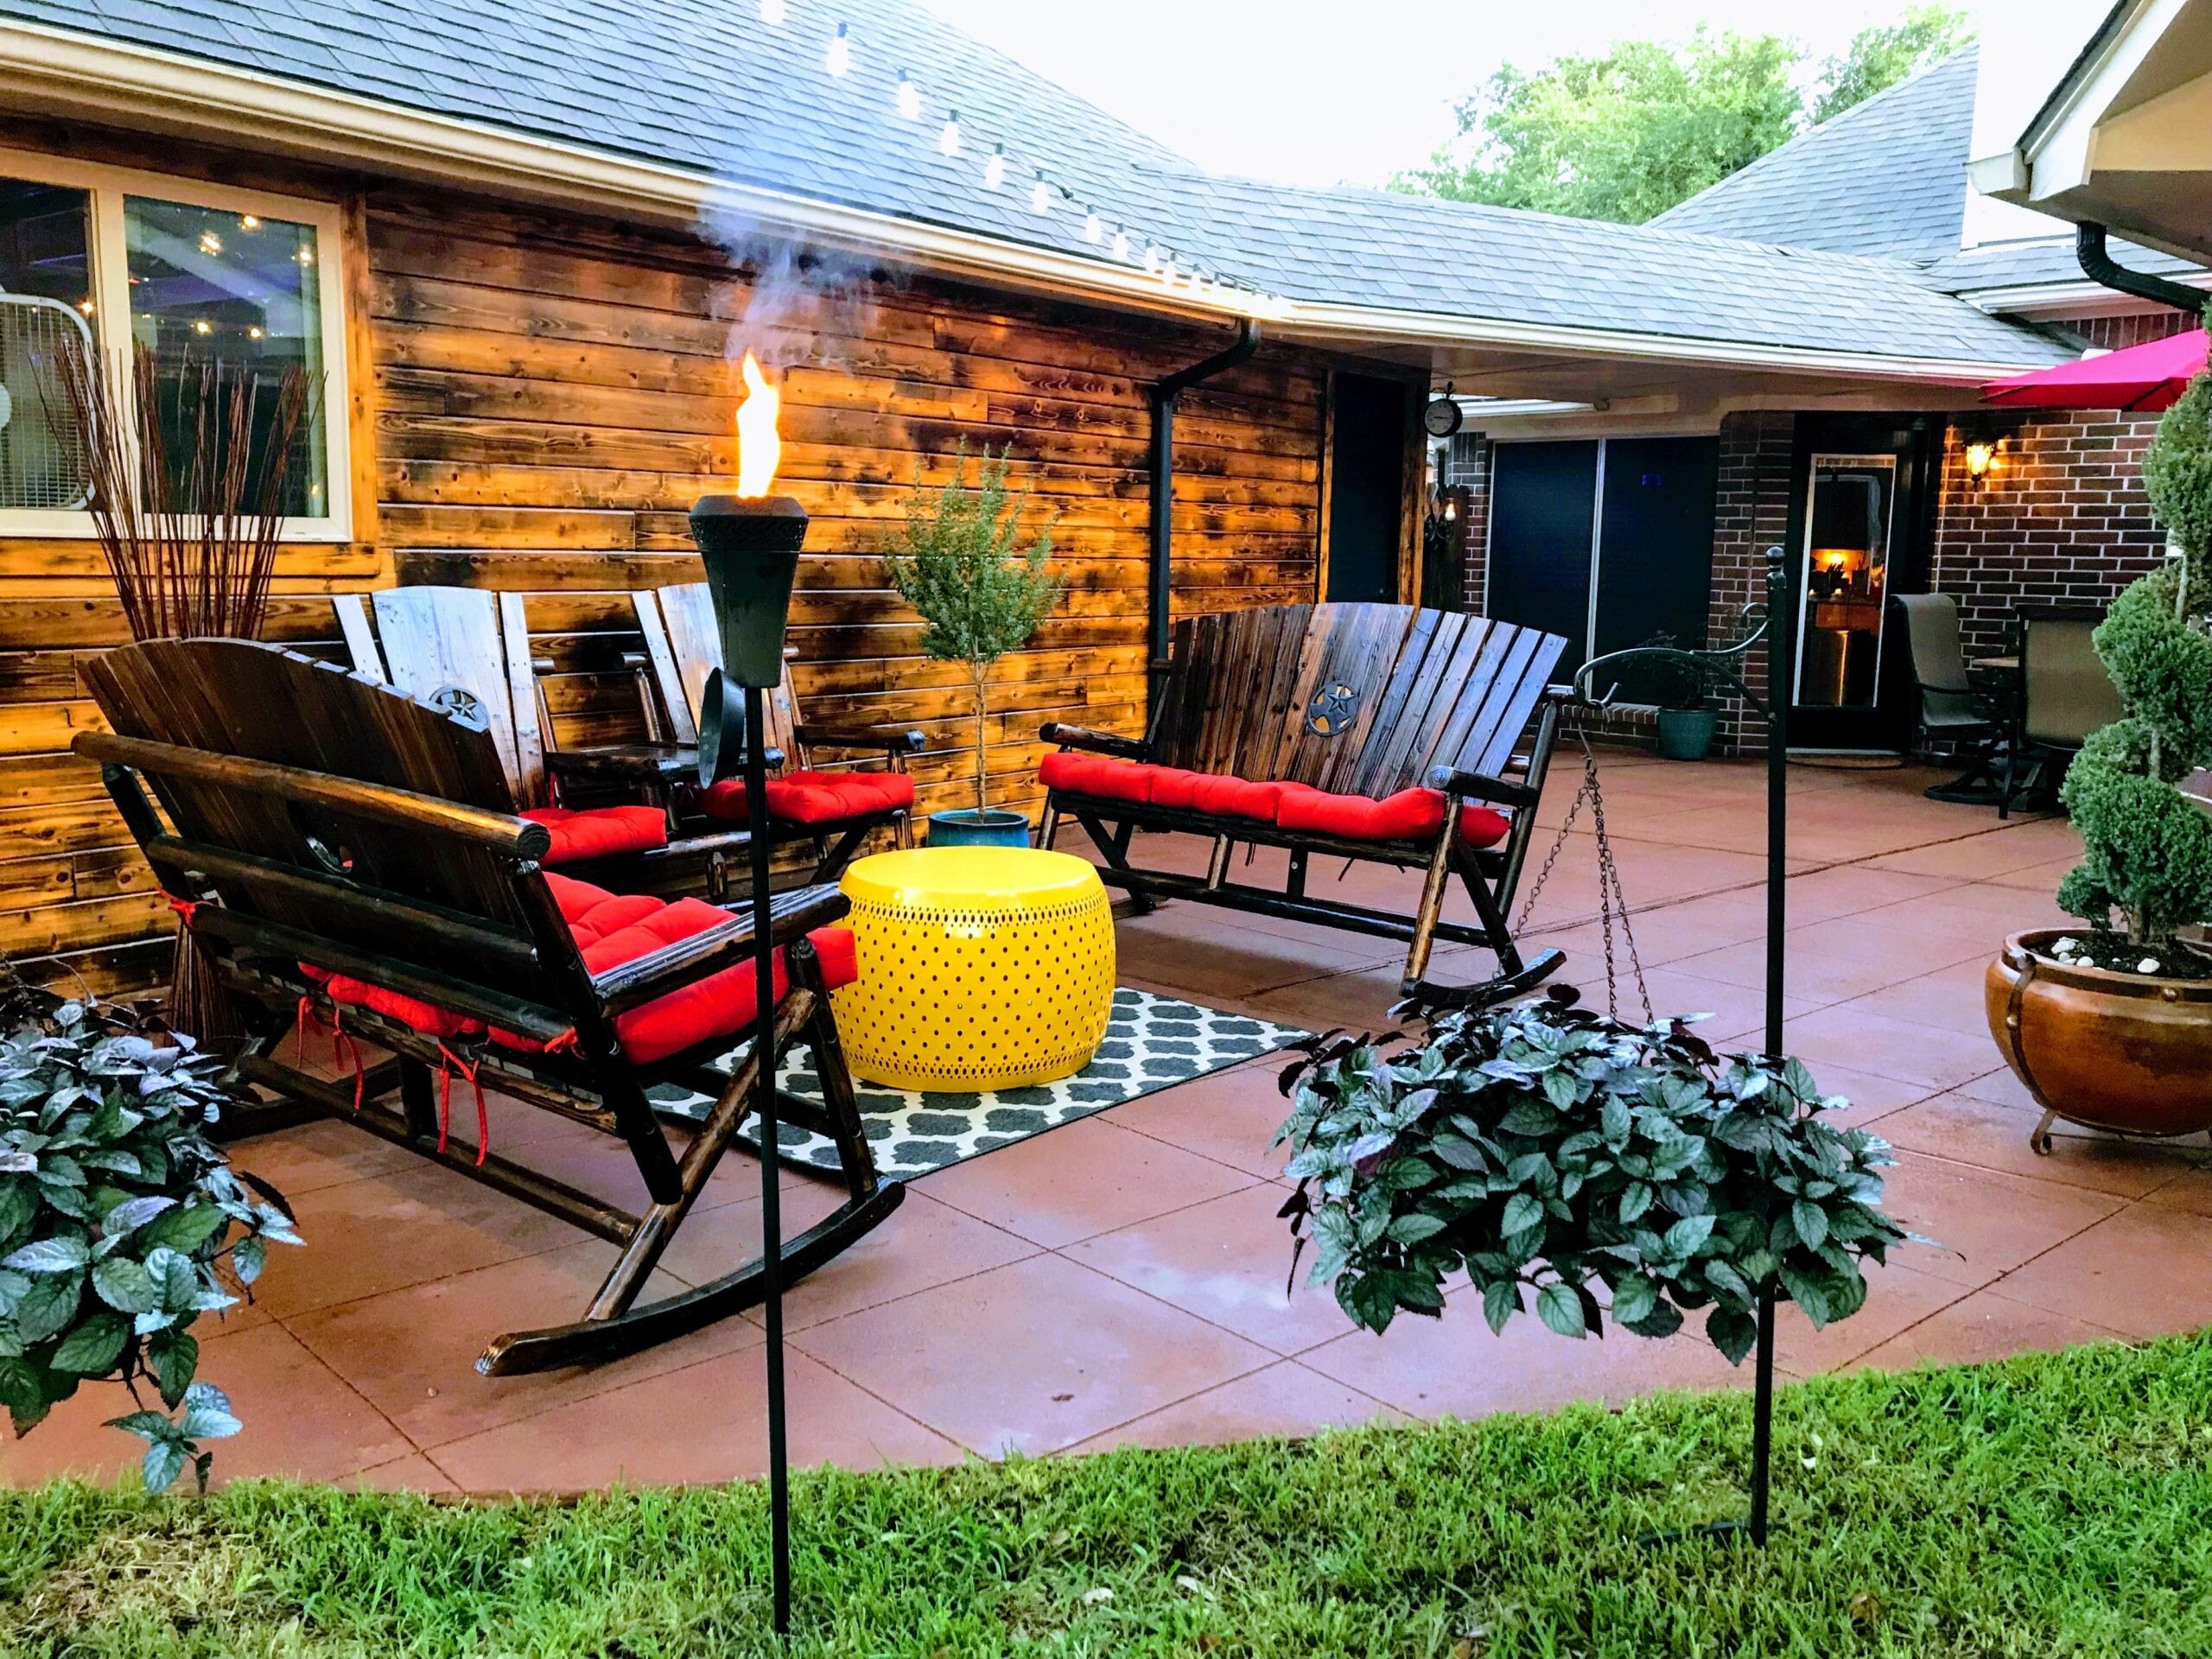 A vibrant scored concrete patio stained with a mix of Milano Red, Driftwood, and Pumpkin Antiquing concrete stains, complemented by eye-catching red wooden patio chairs, a vivid yellow table, torches, and string lights for a lively outdoor atmosphere.